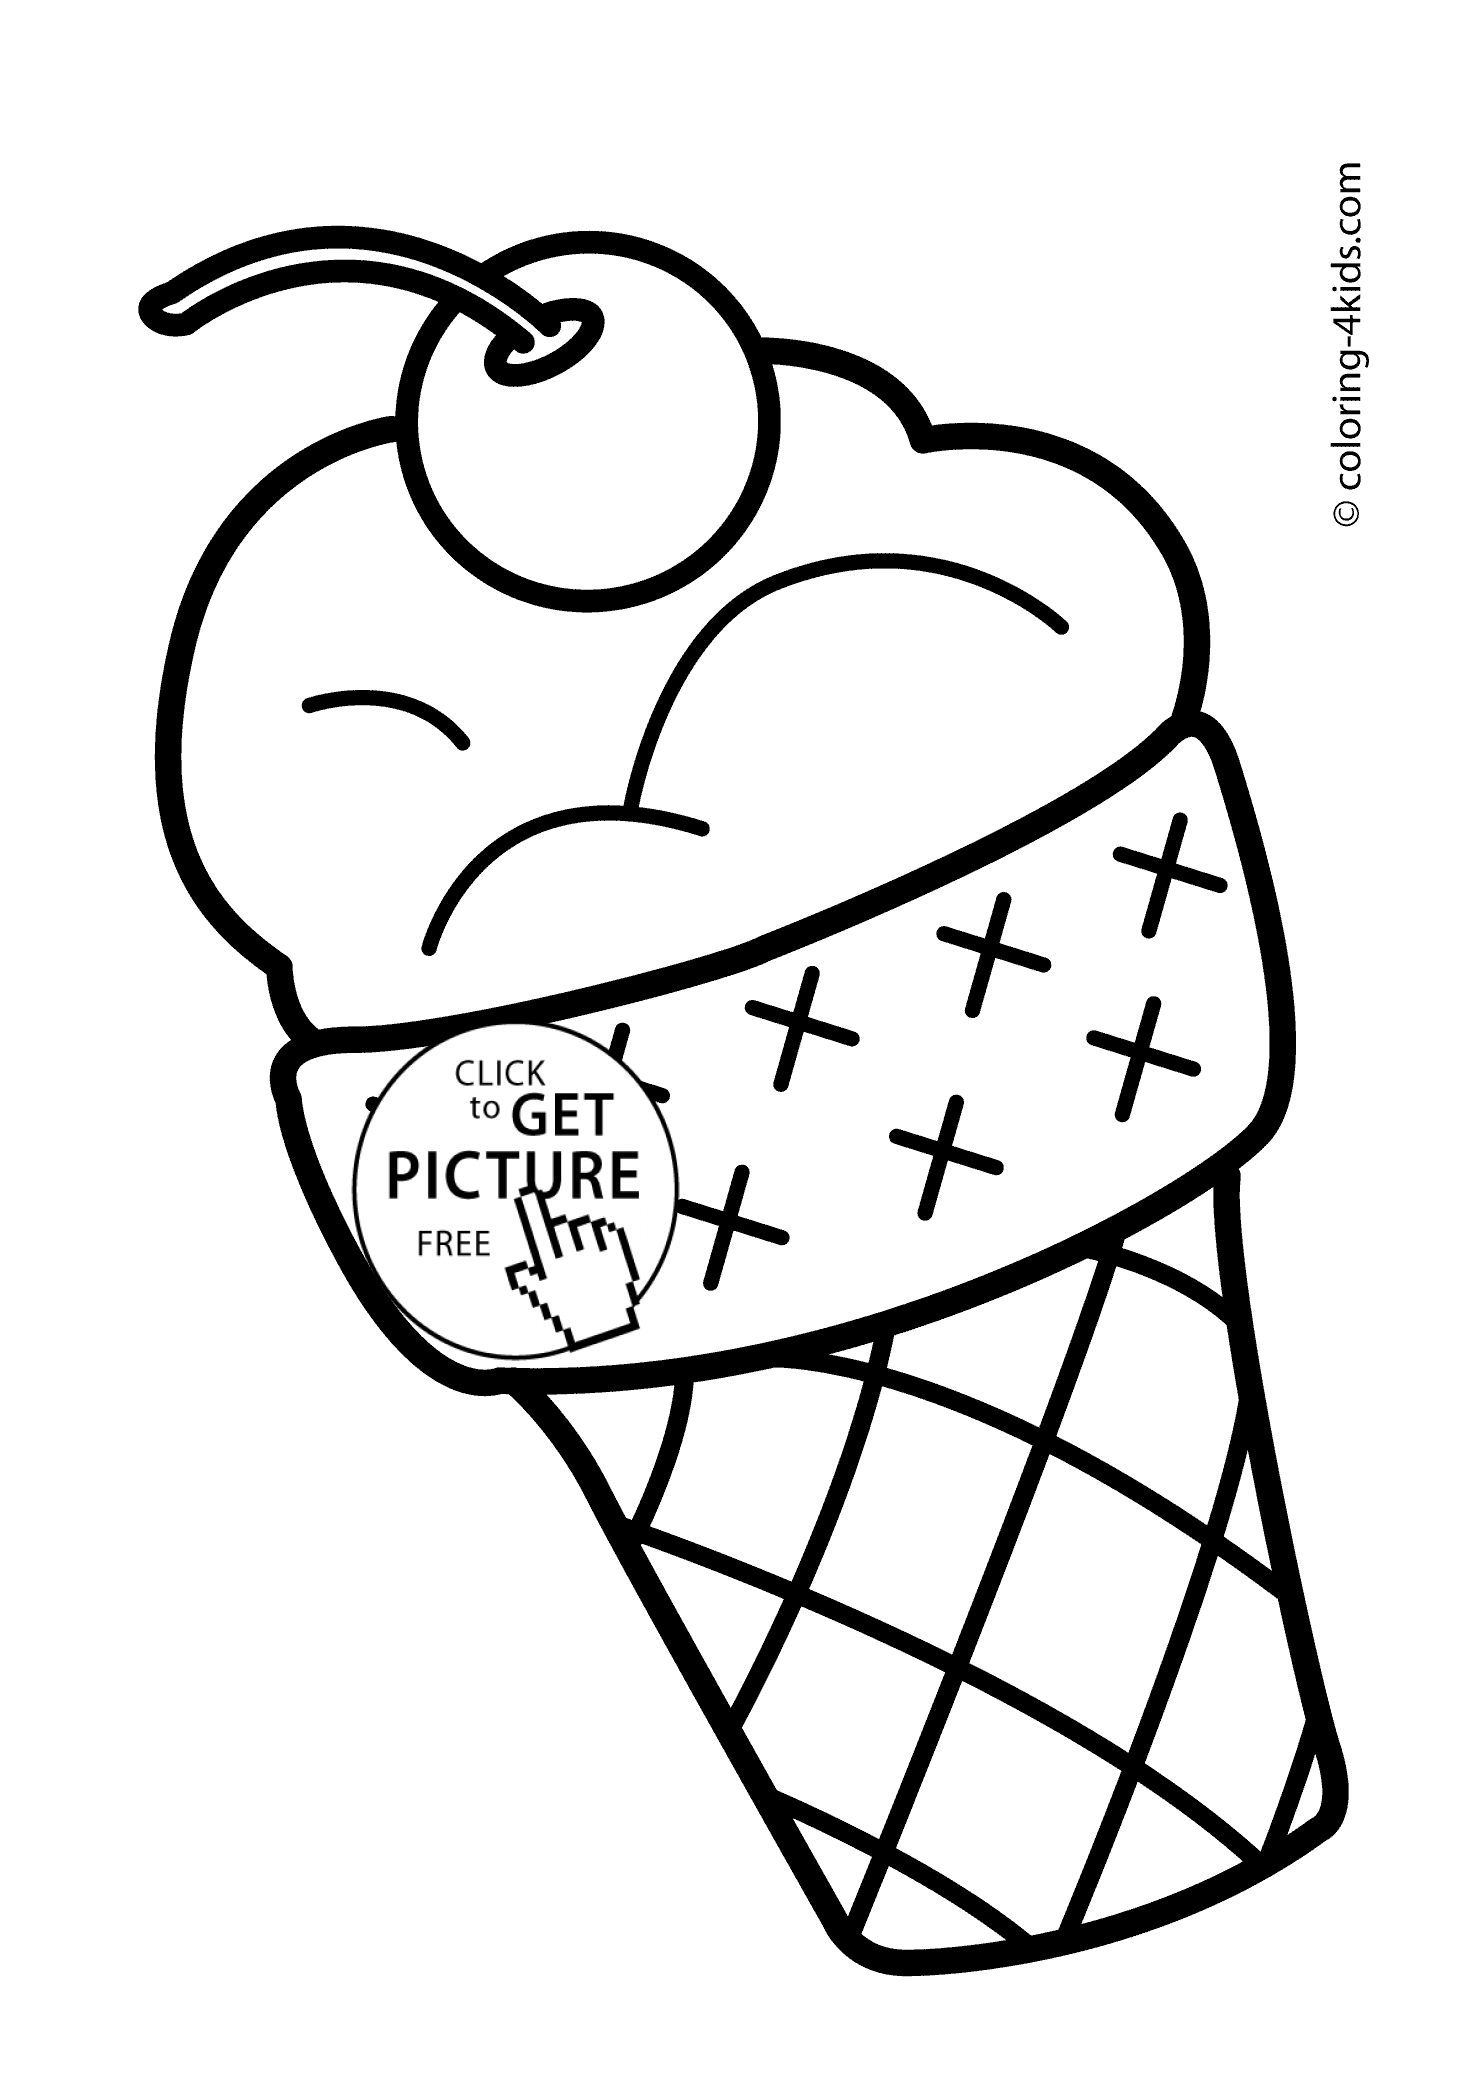 Summer Coloring Pages Free Summer Coloring Pages With Ice Cream For Kids Seasons Coloring